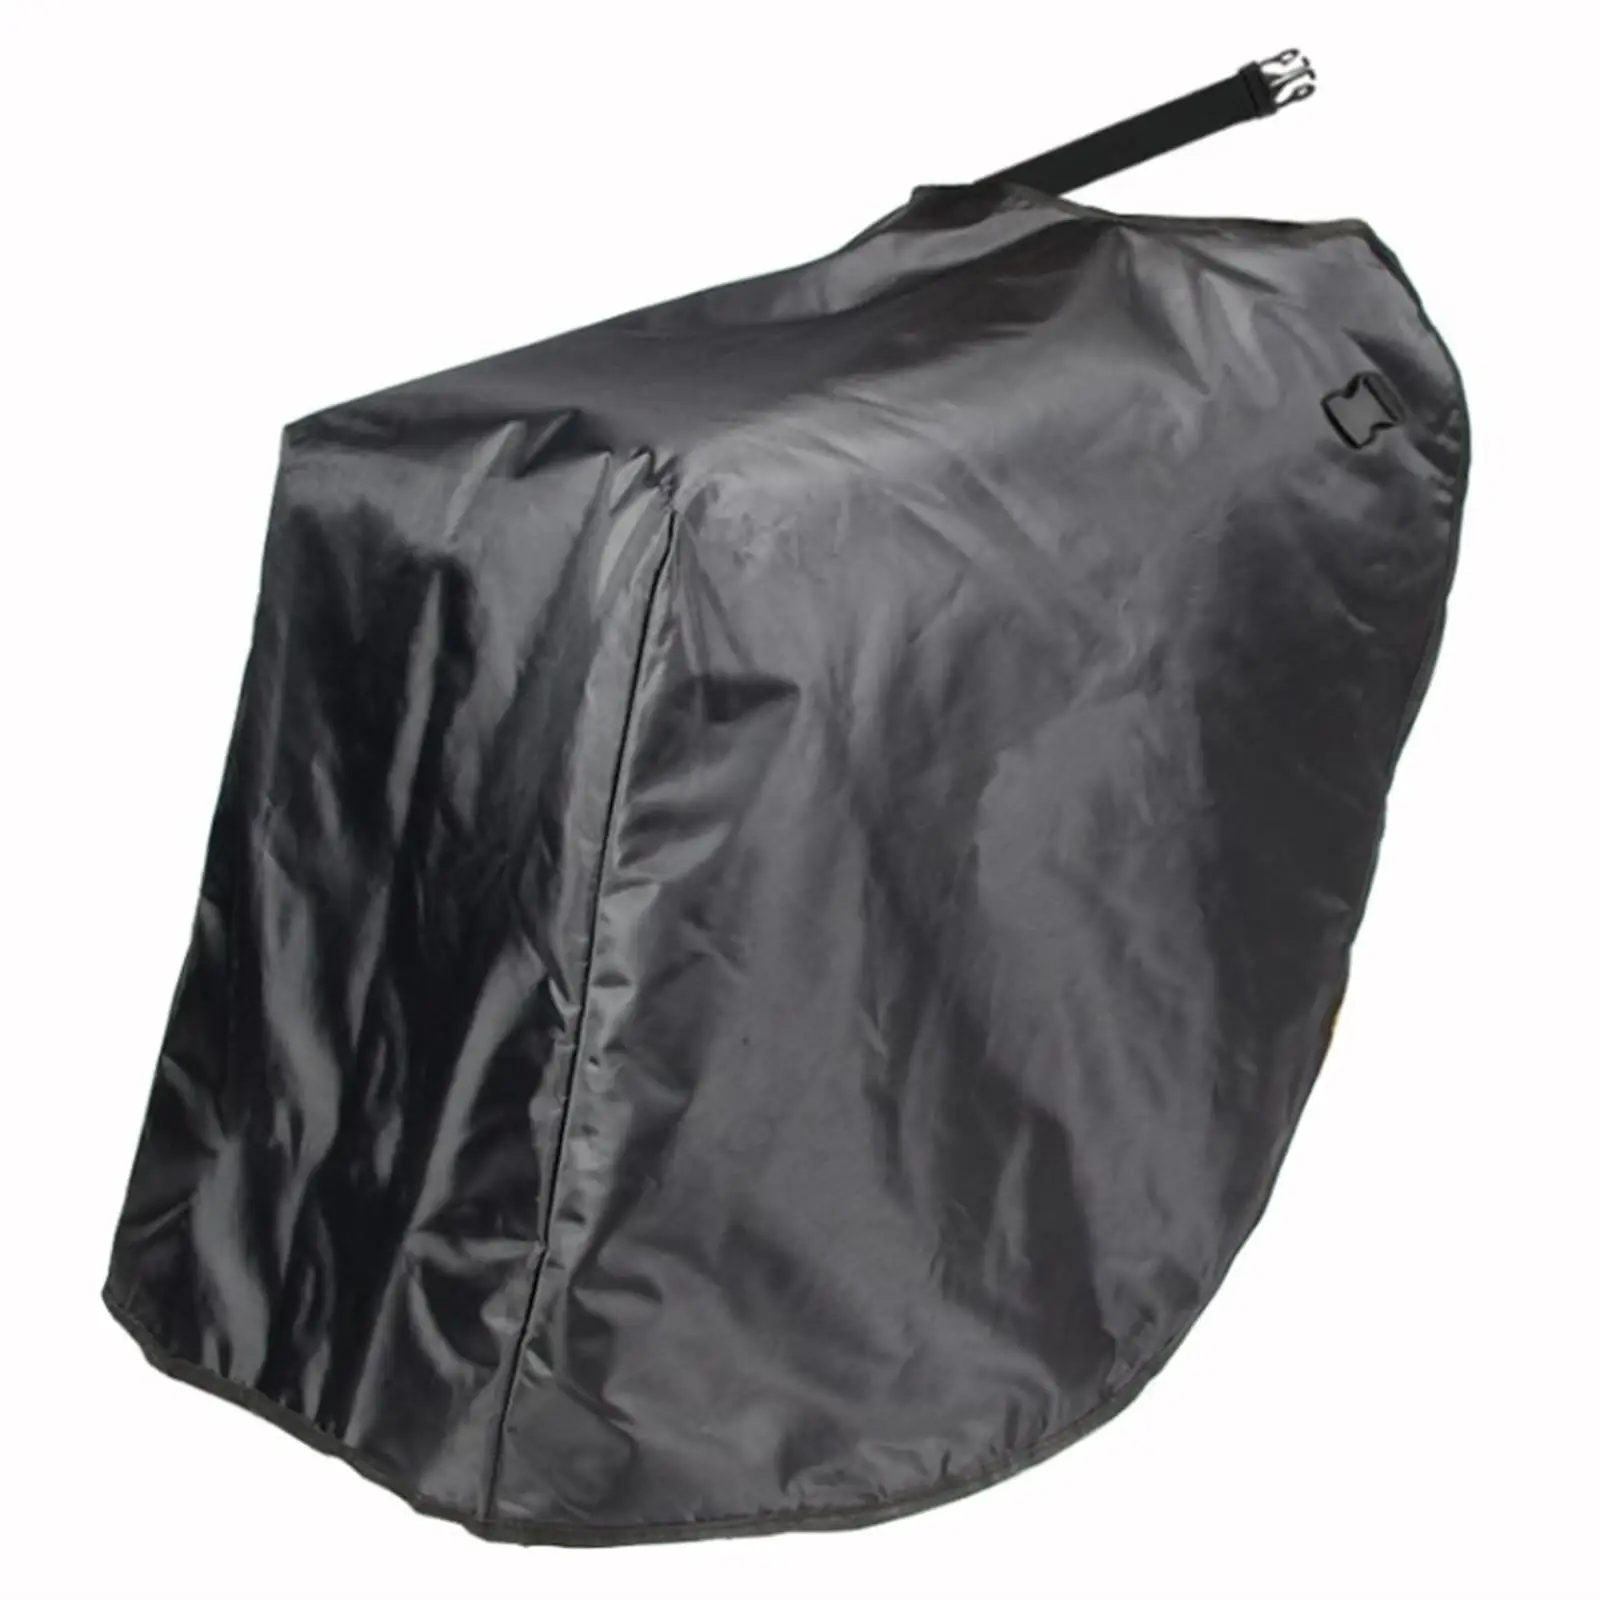 Motorcycle Windproof Quilt, ,Electric Car Windshield by Autumn/ Velvet Thickening Waterproof Cold Warmth Quilt Rain Cover